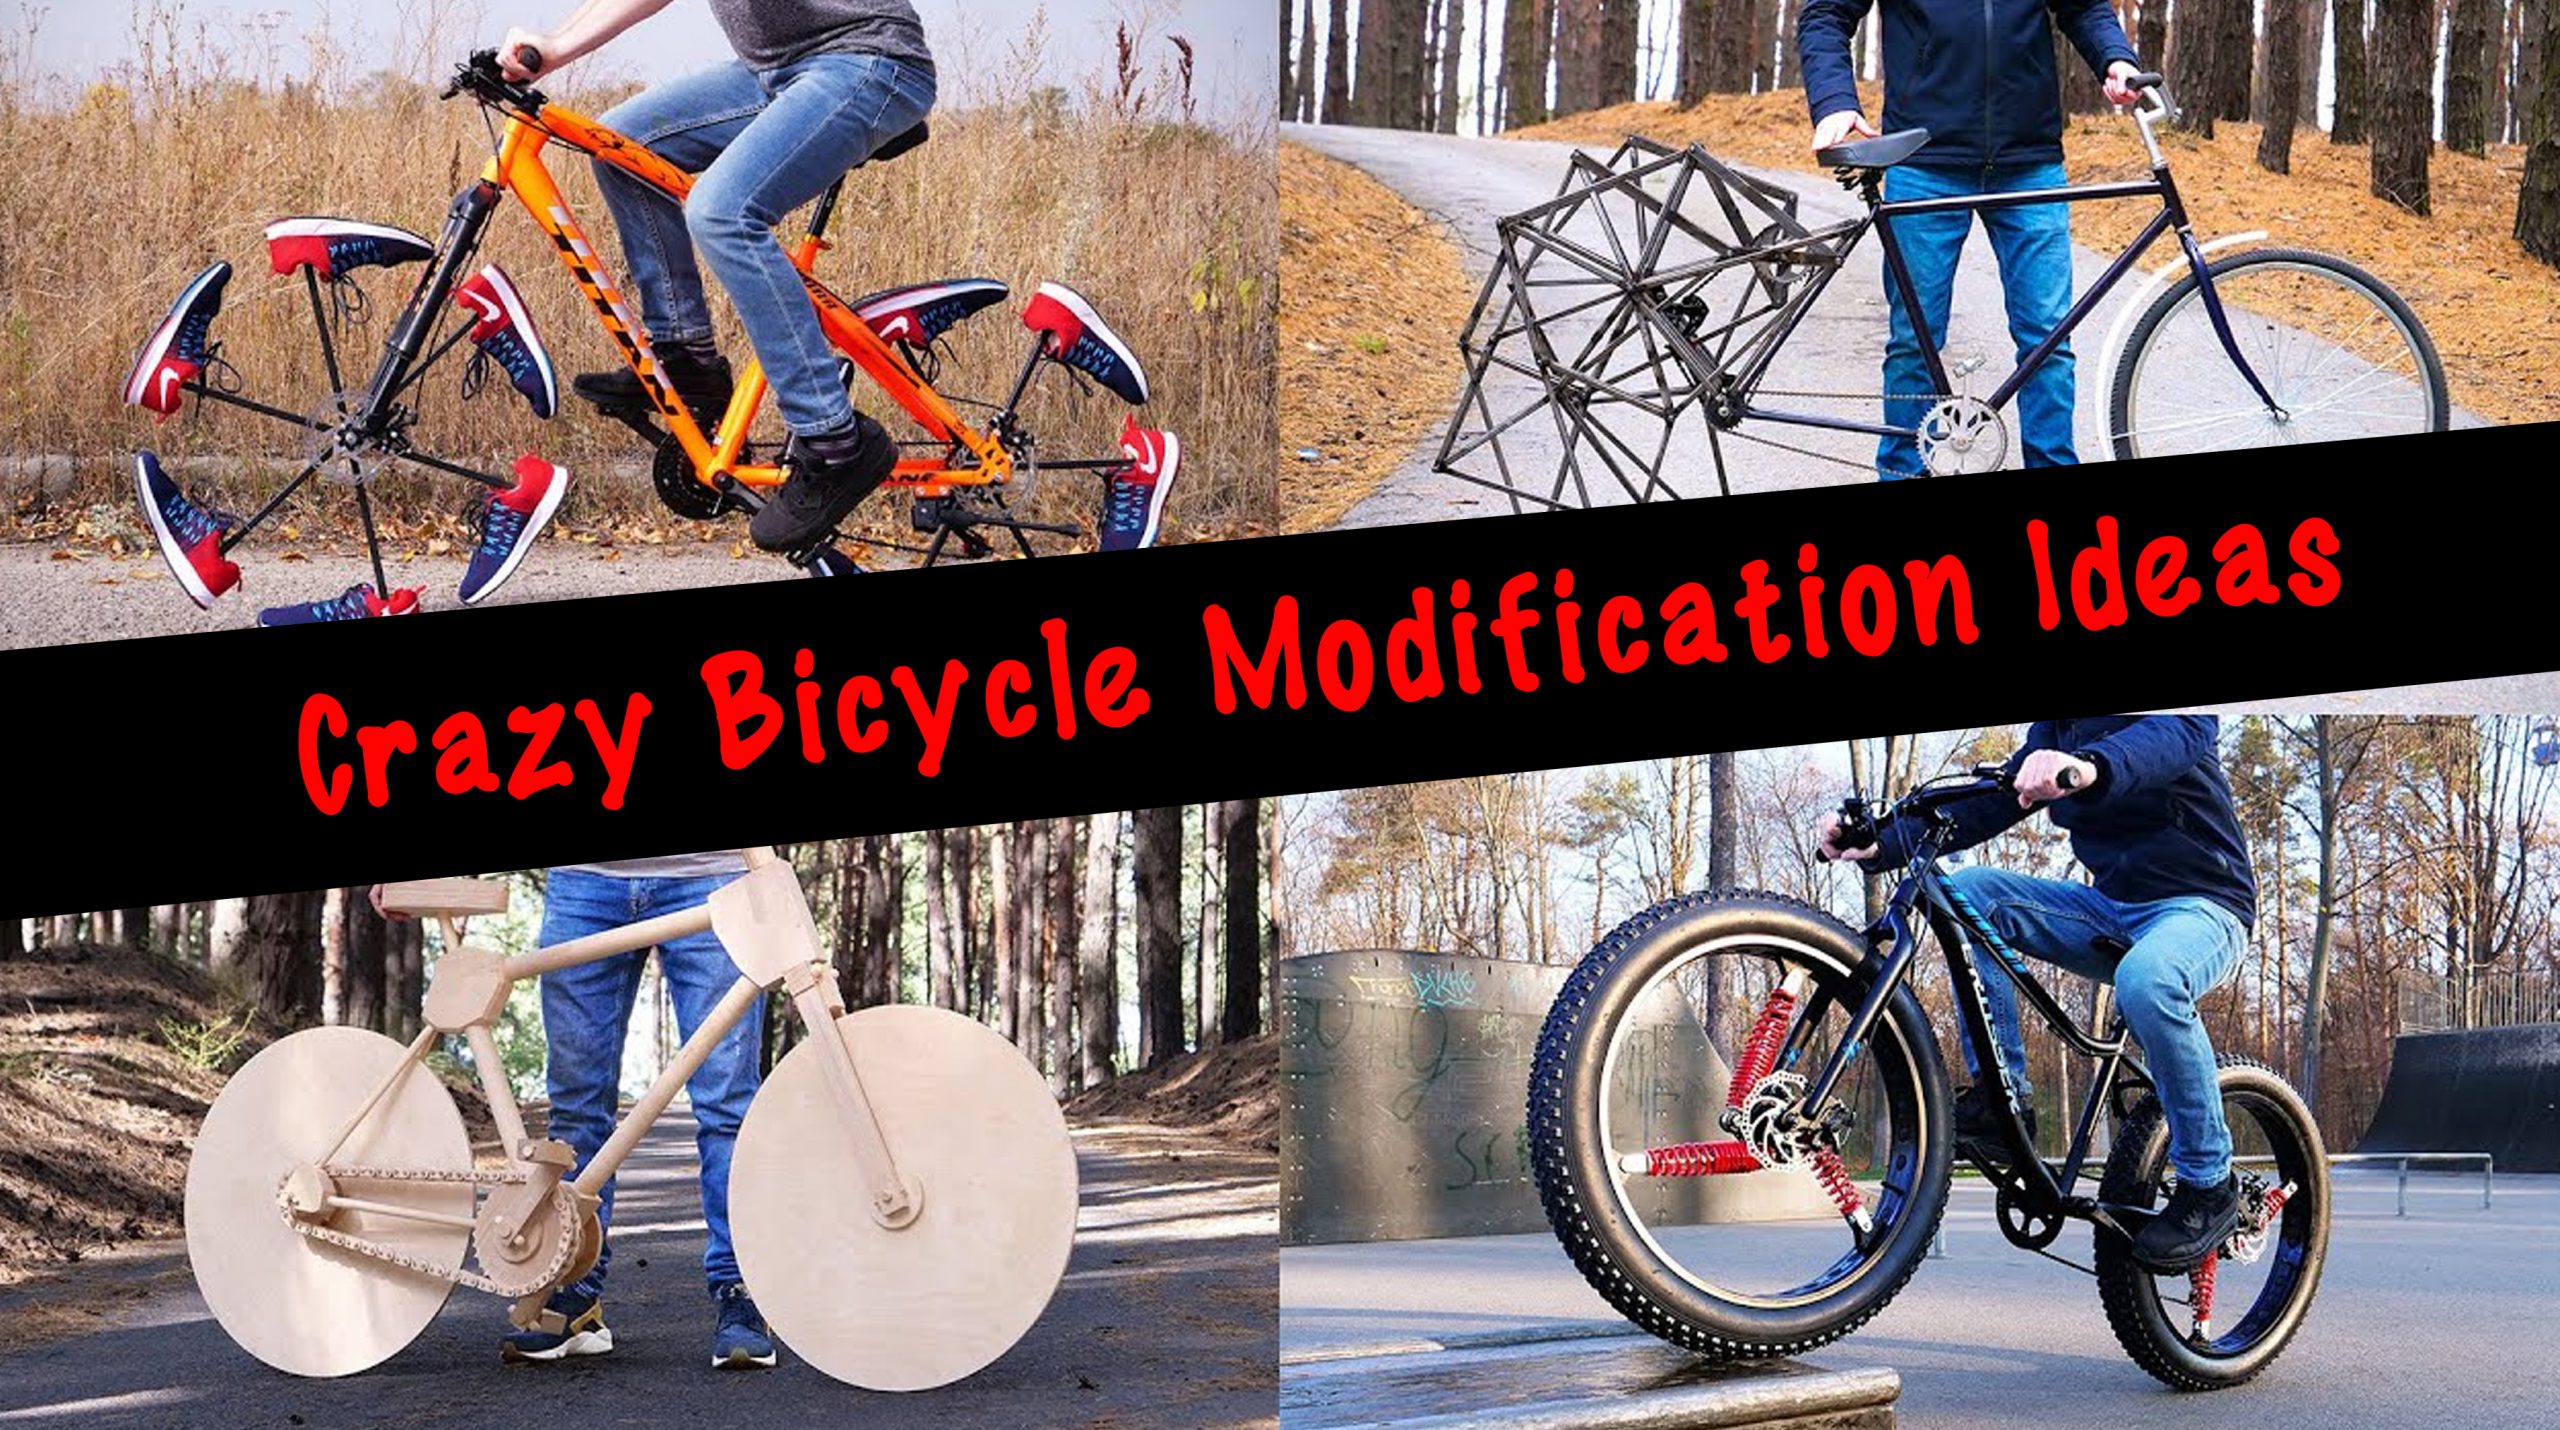 Crazy Bicycle Modification Ideas